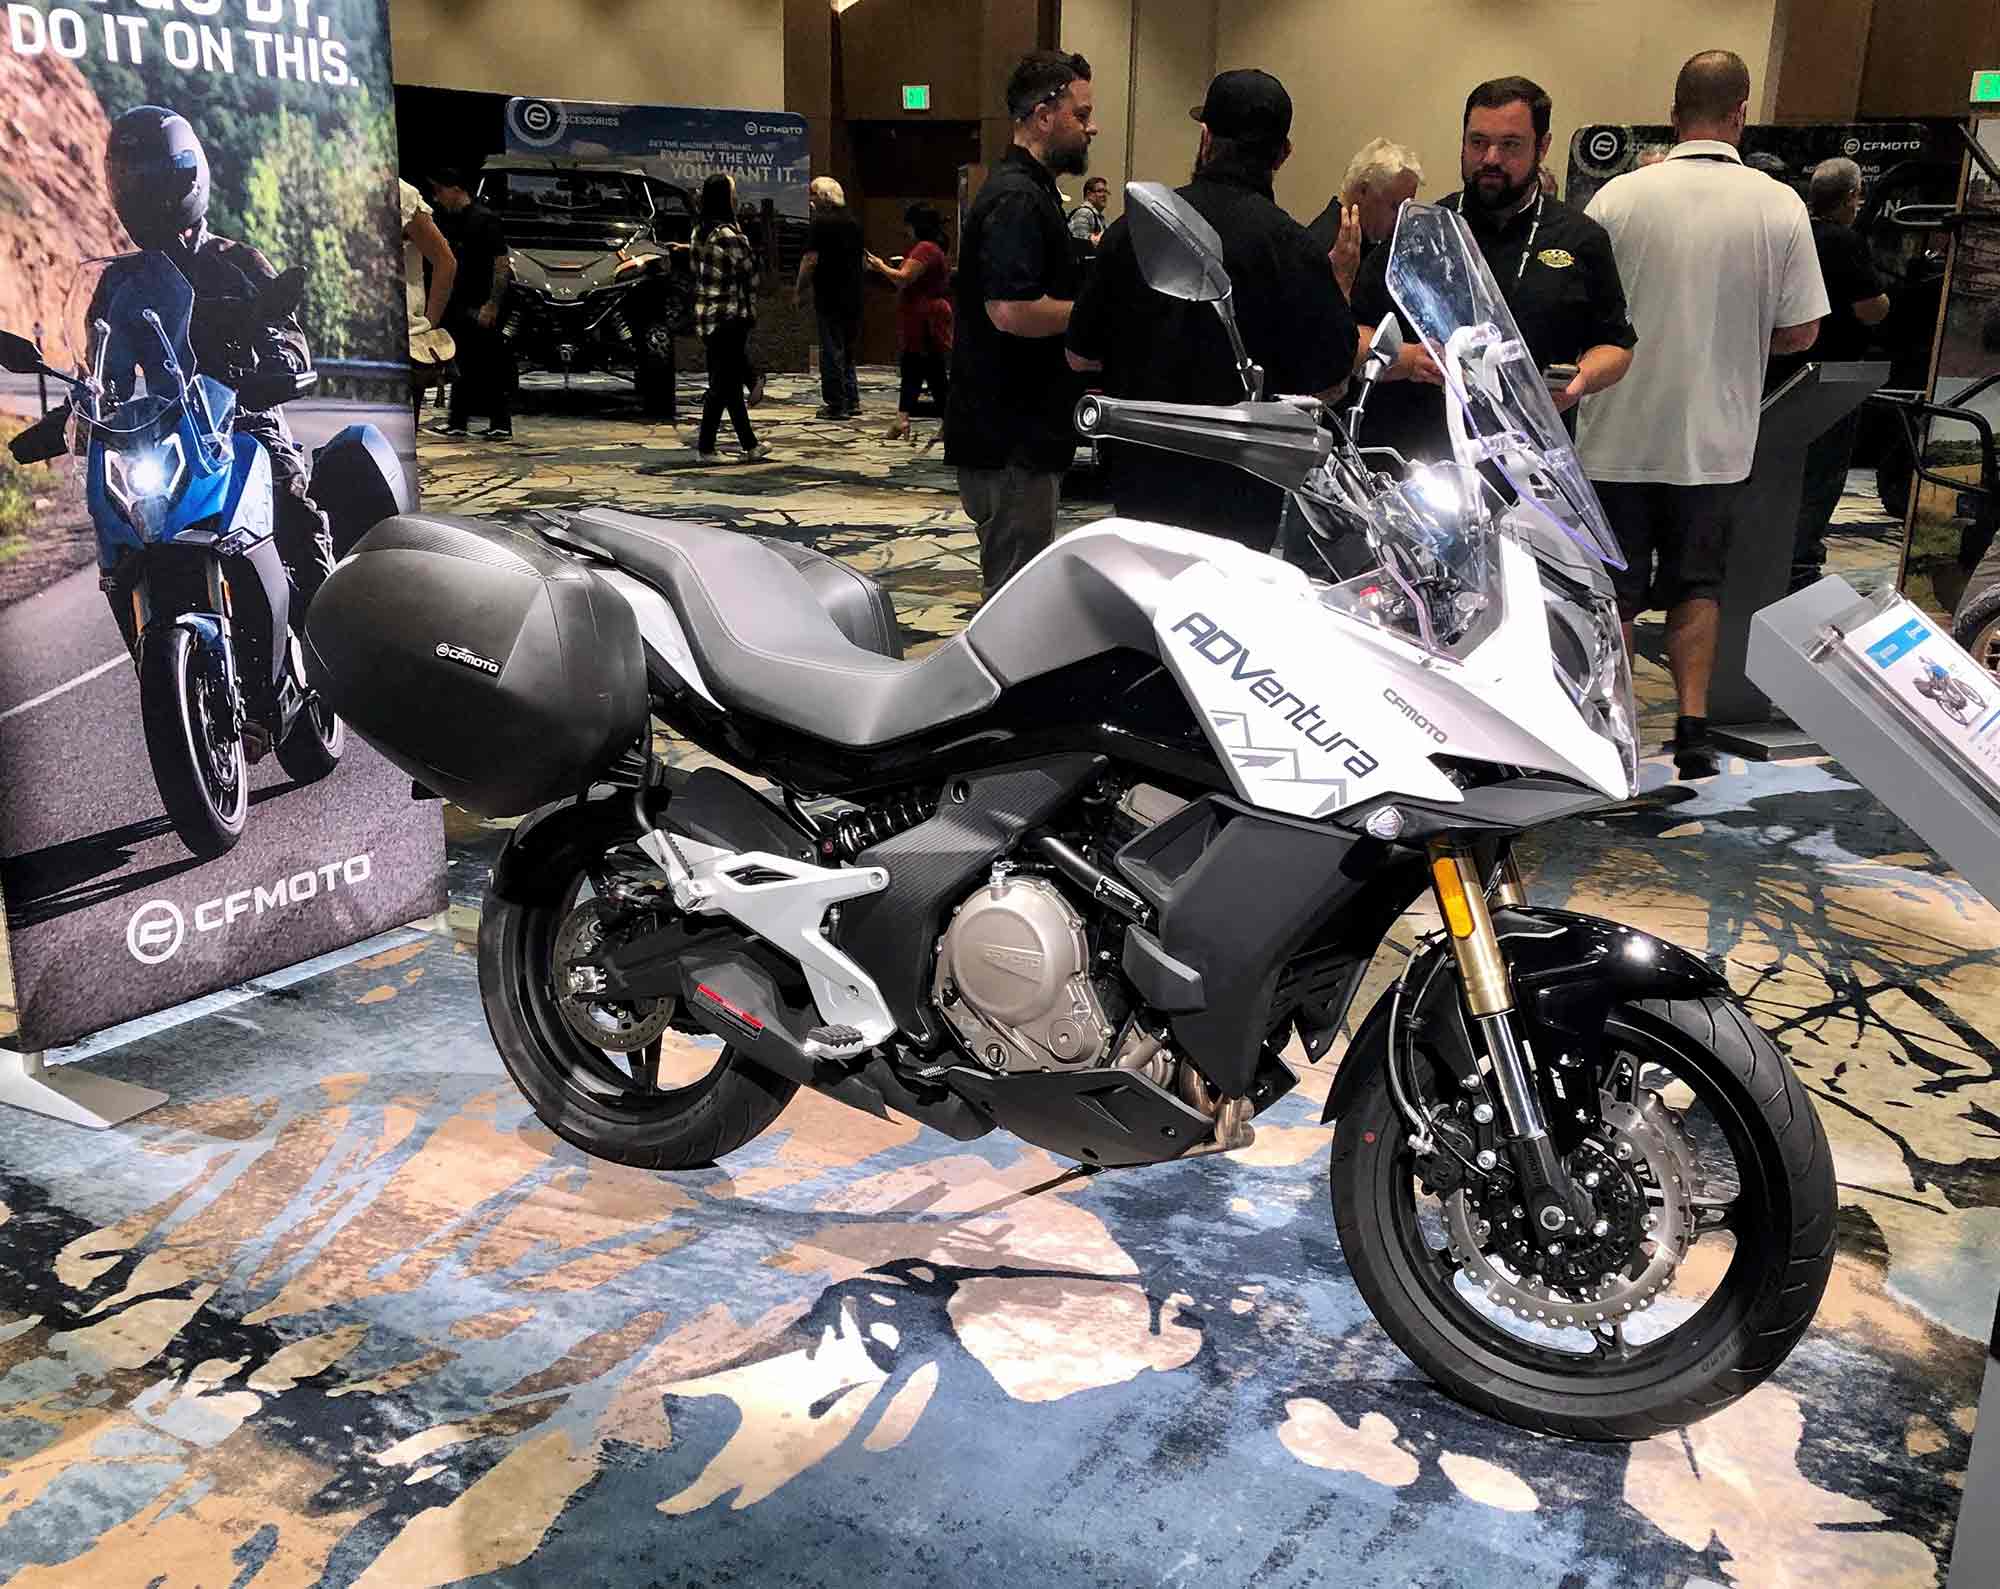 Cfmoto To Enter Us Market With Four New Motorcycles Cycle World